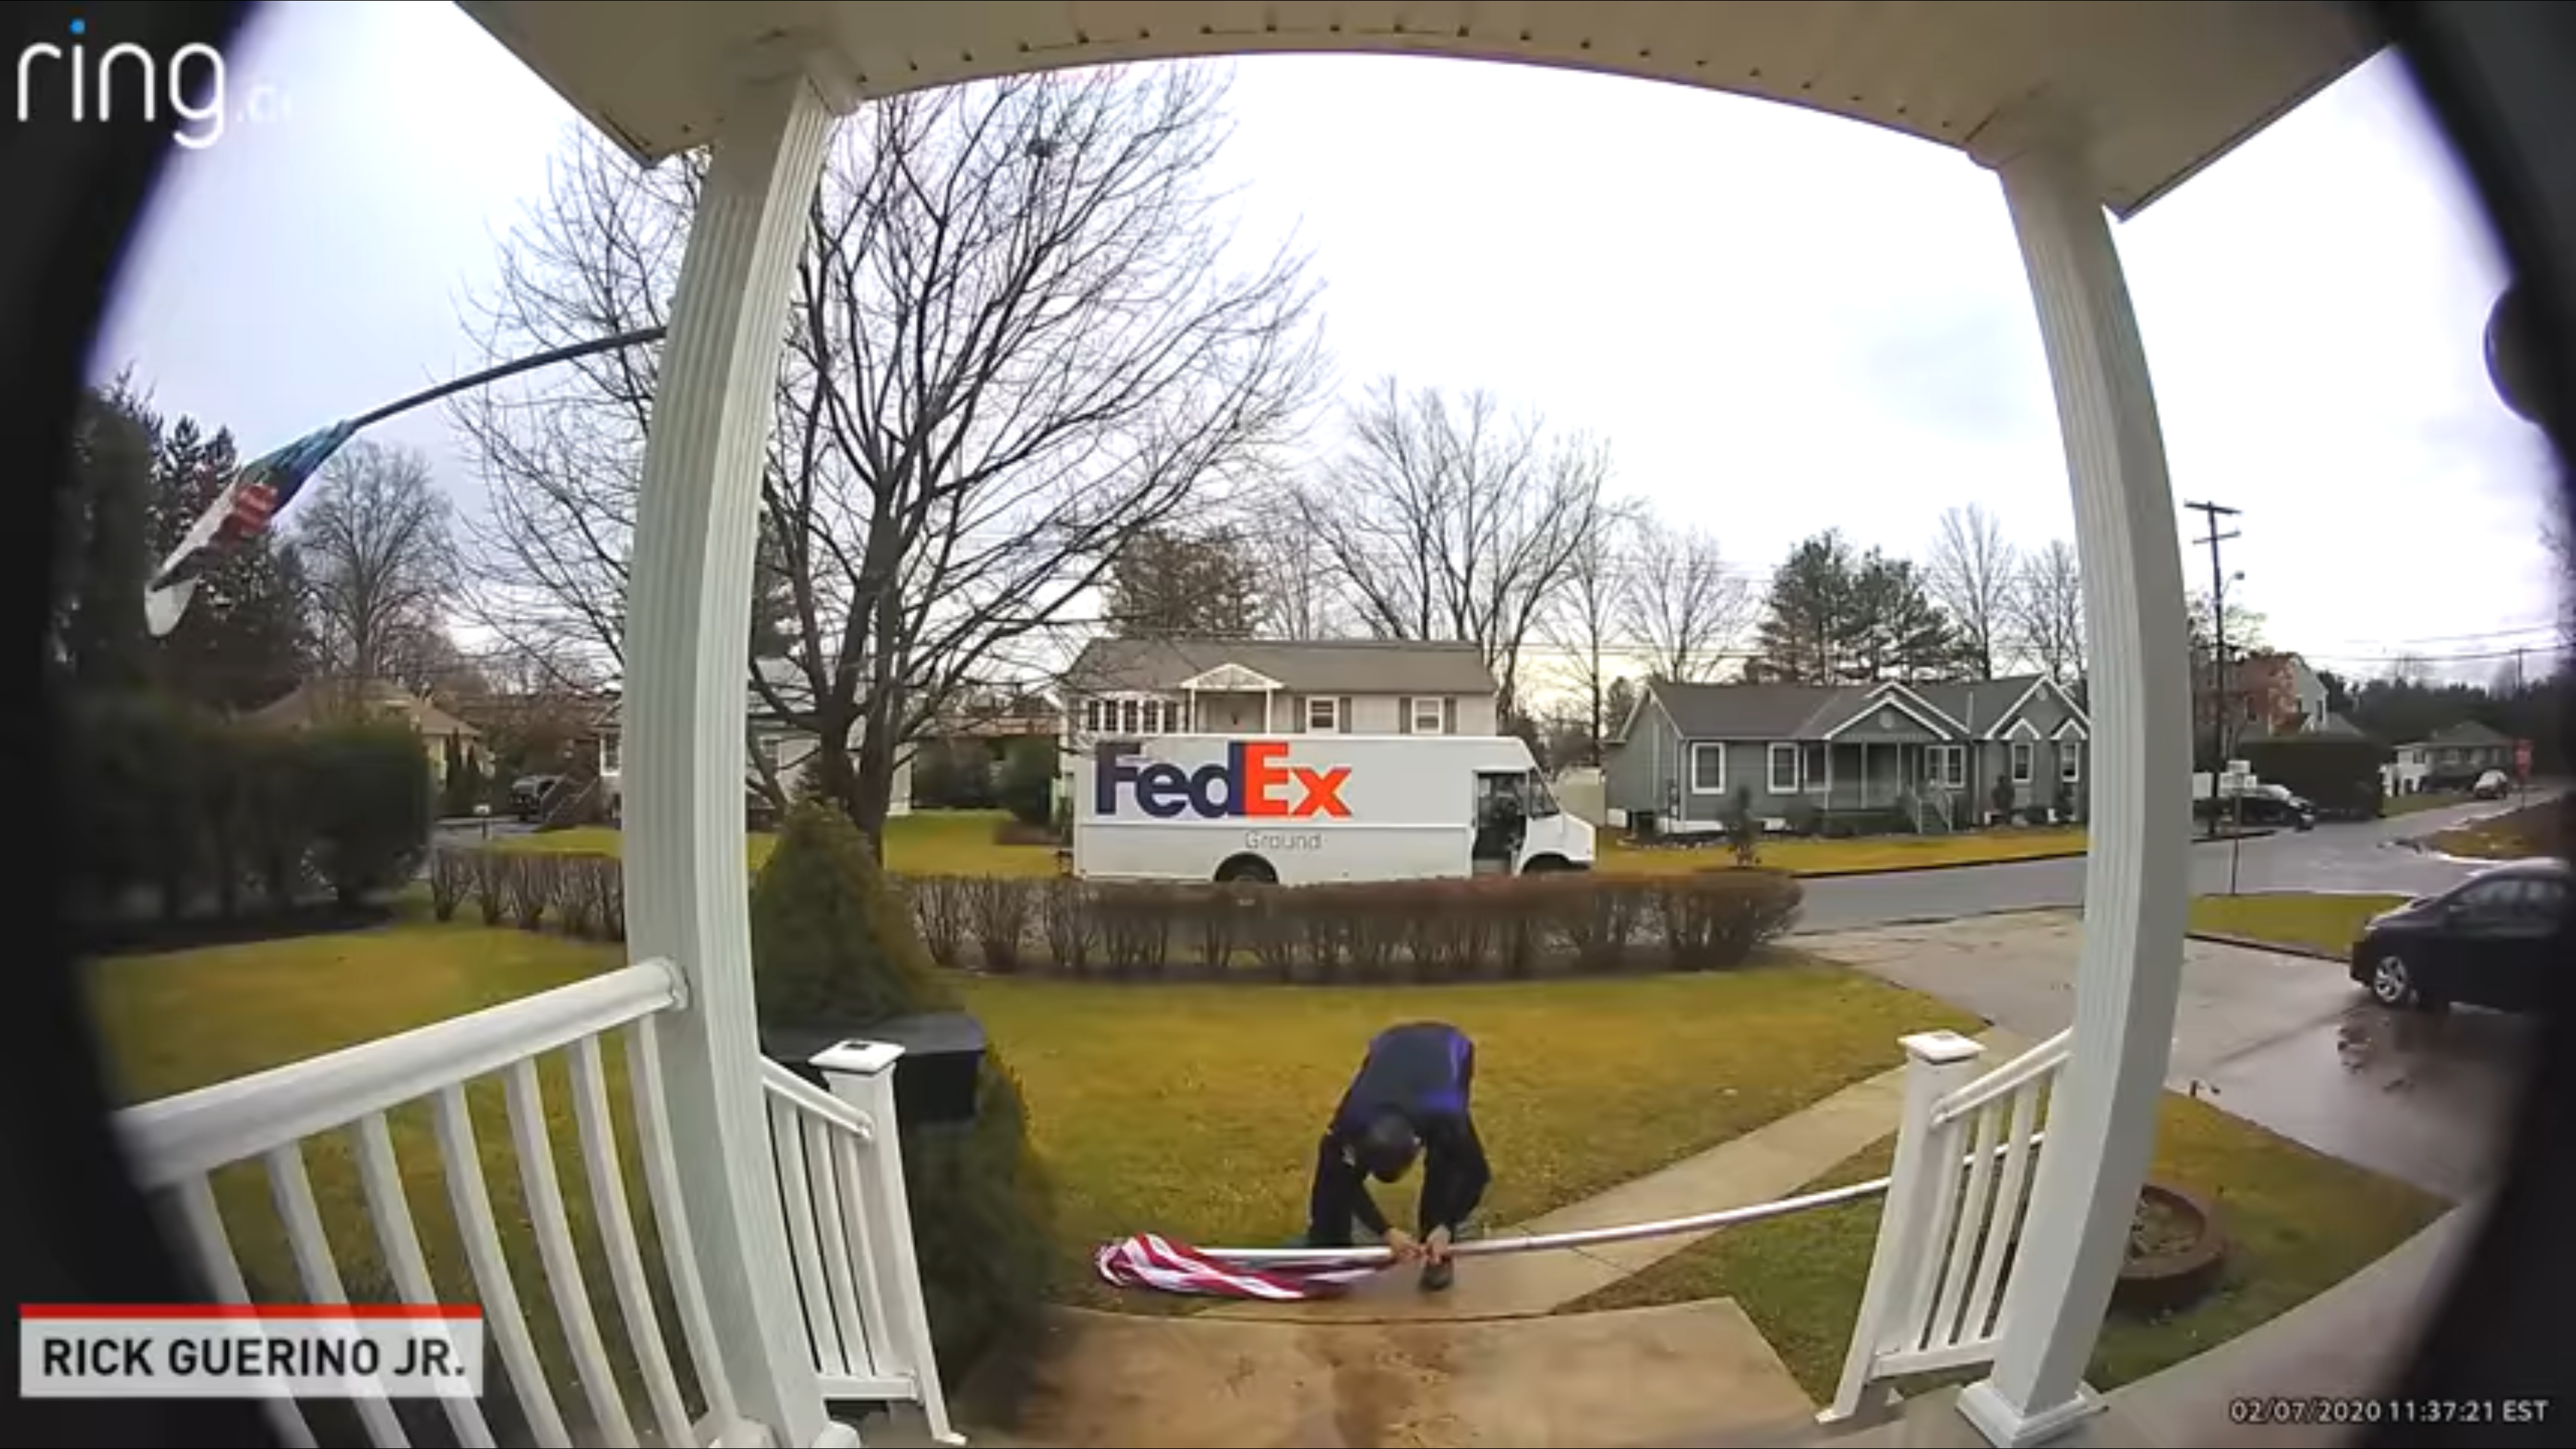 Fed-Ex driver’s delivery takes a patriotic turn in this heartwarming video